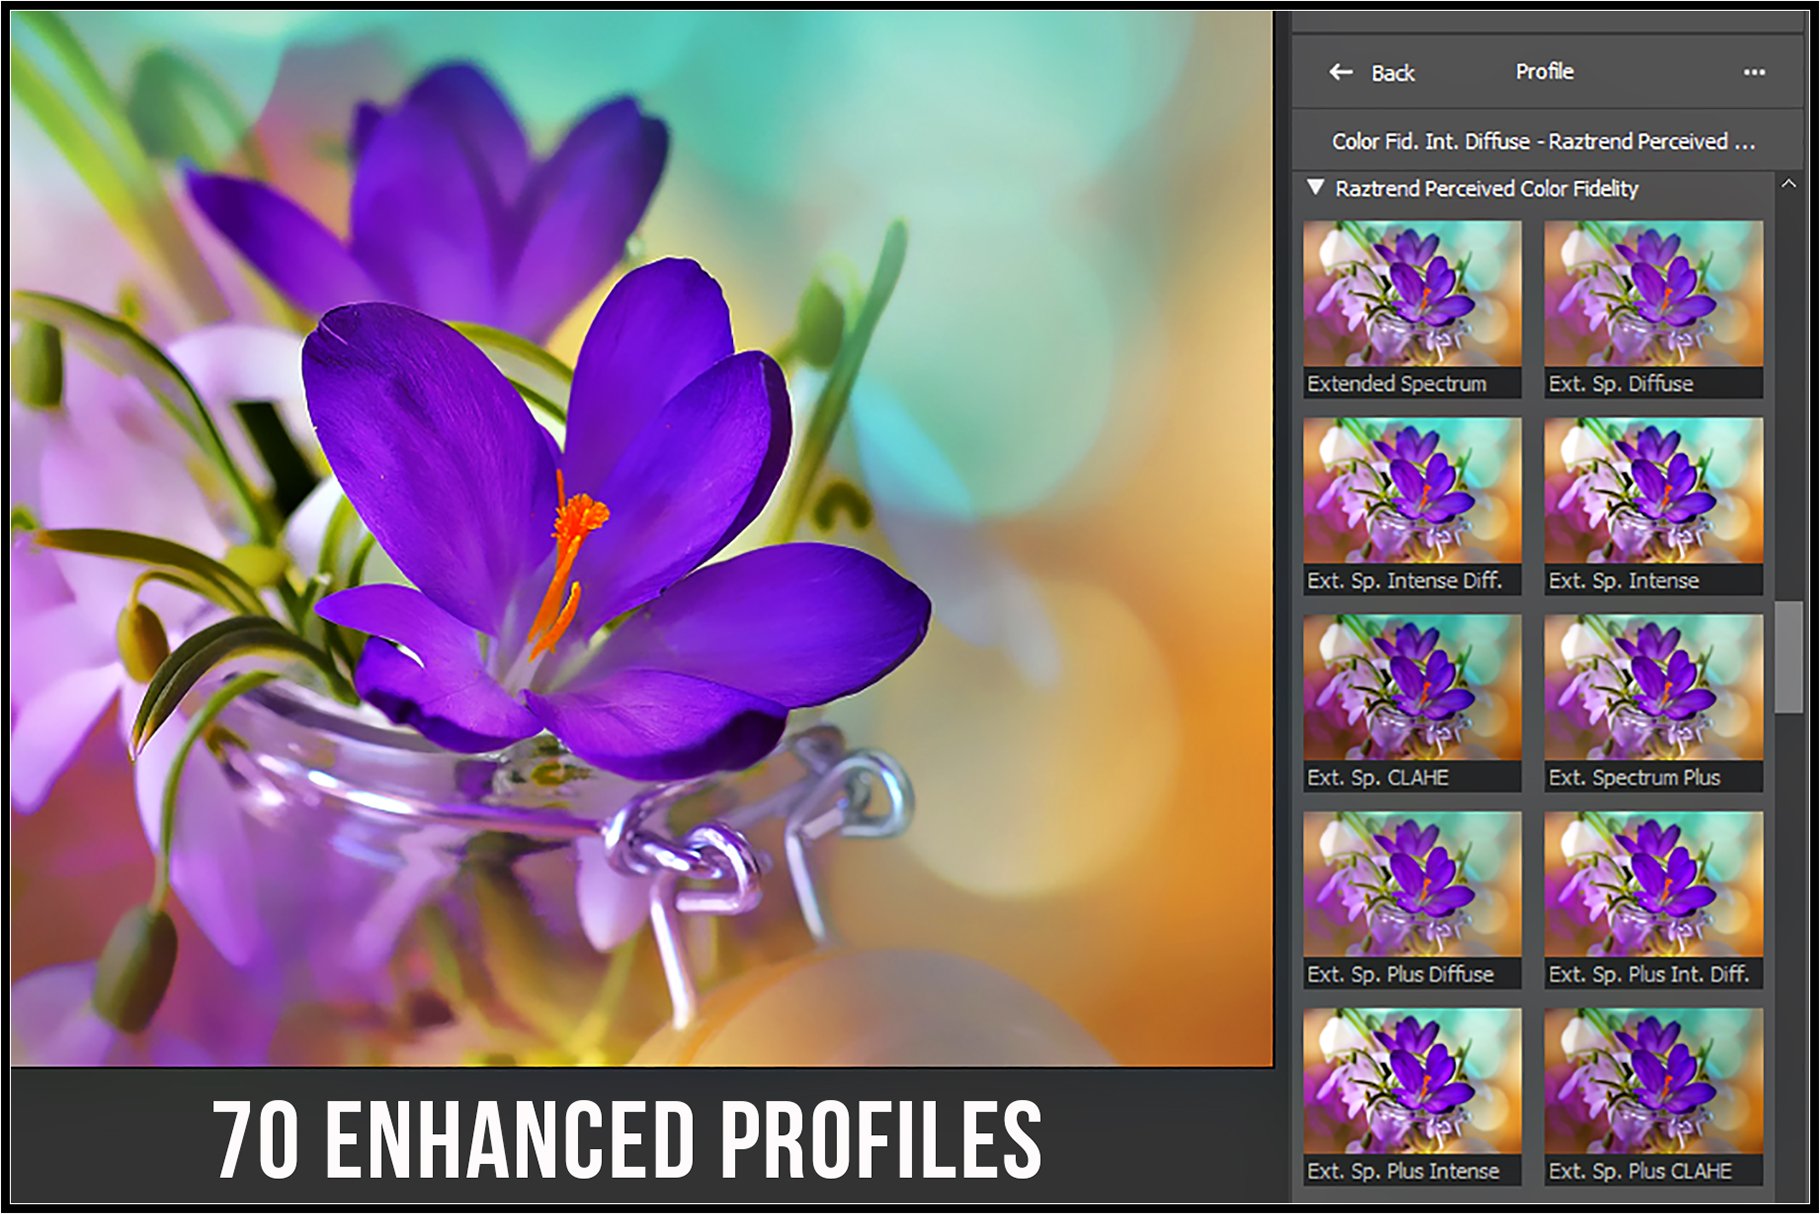 Perceived Color Fidelity profilespreview image.